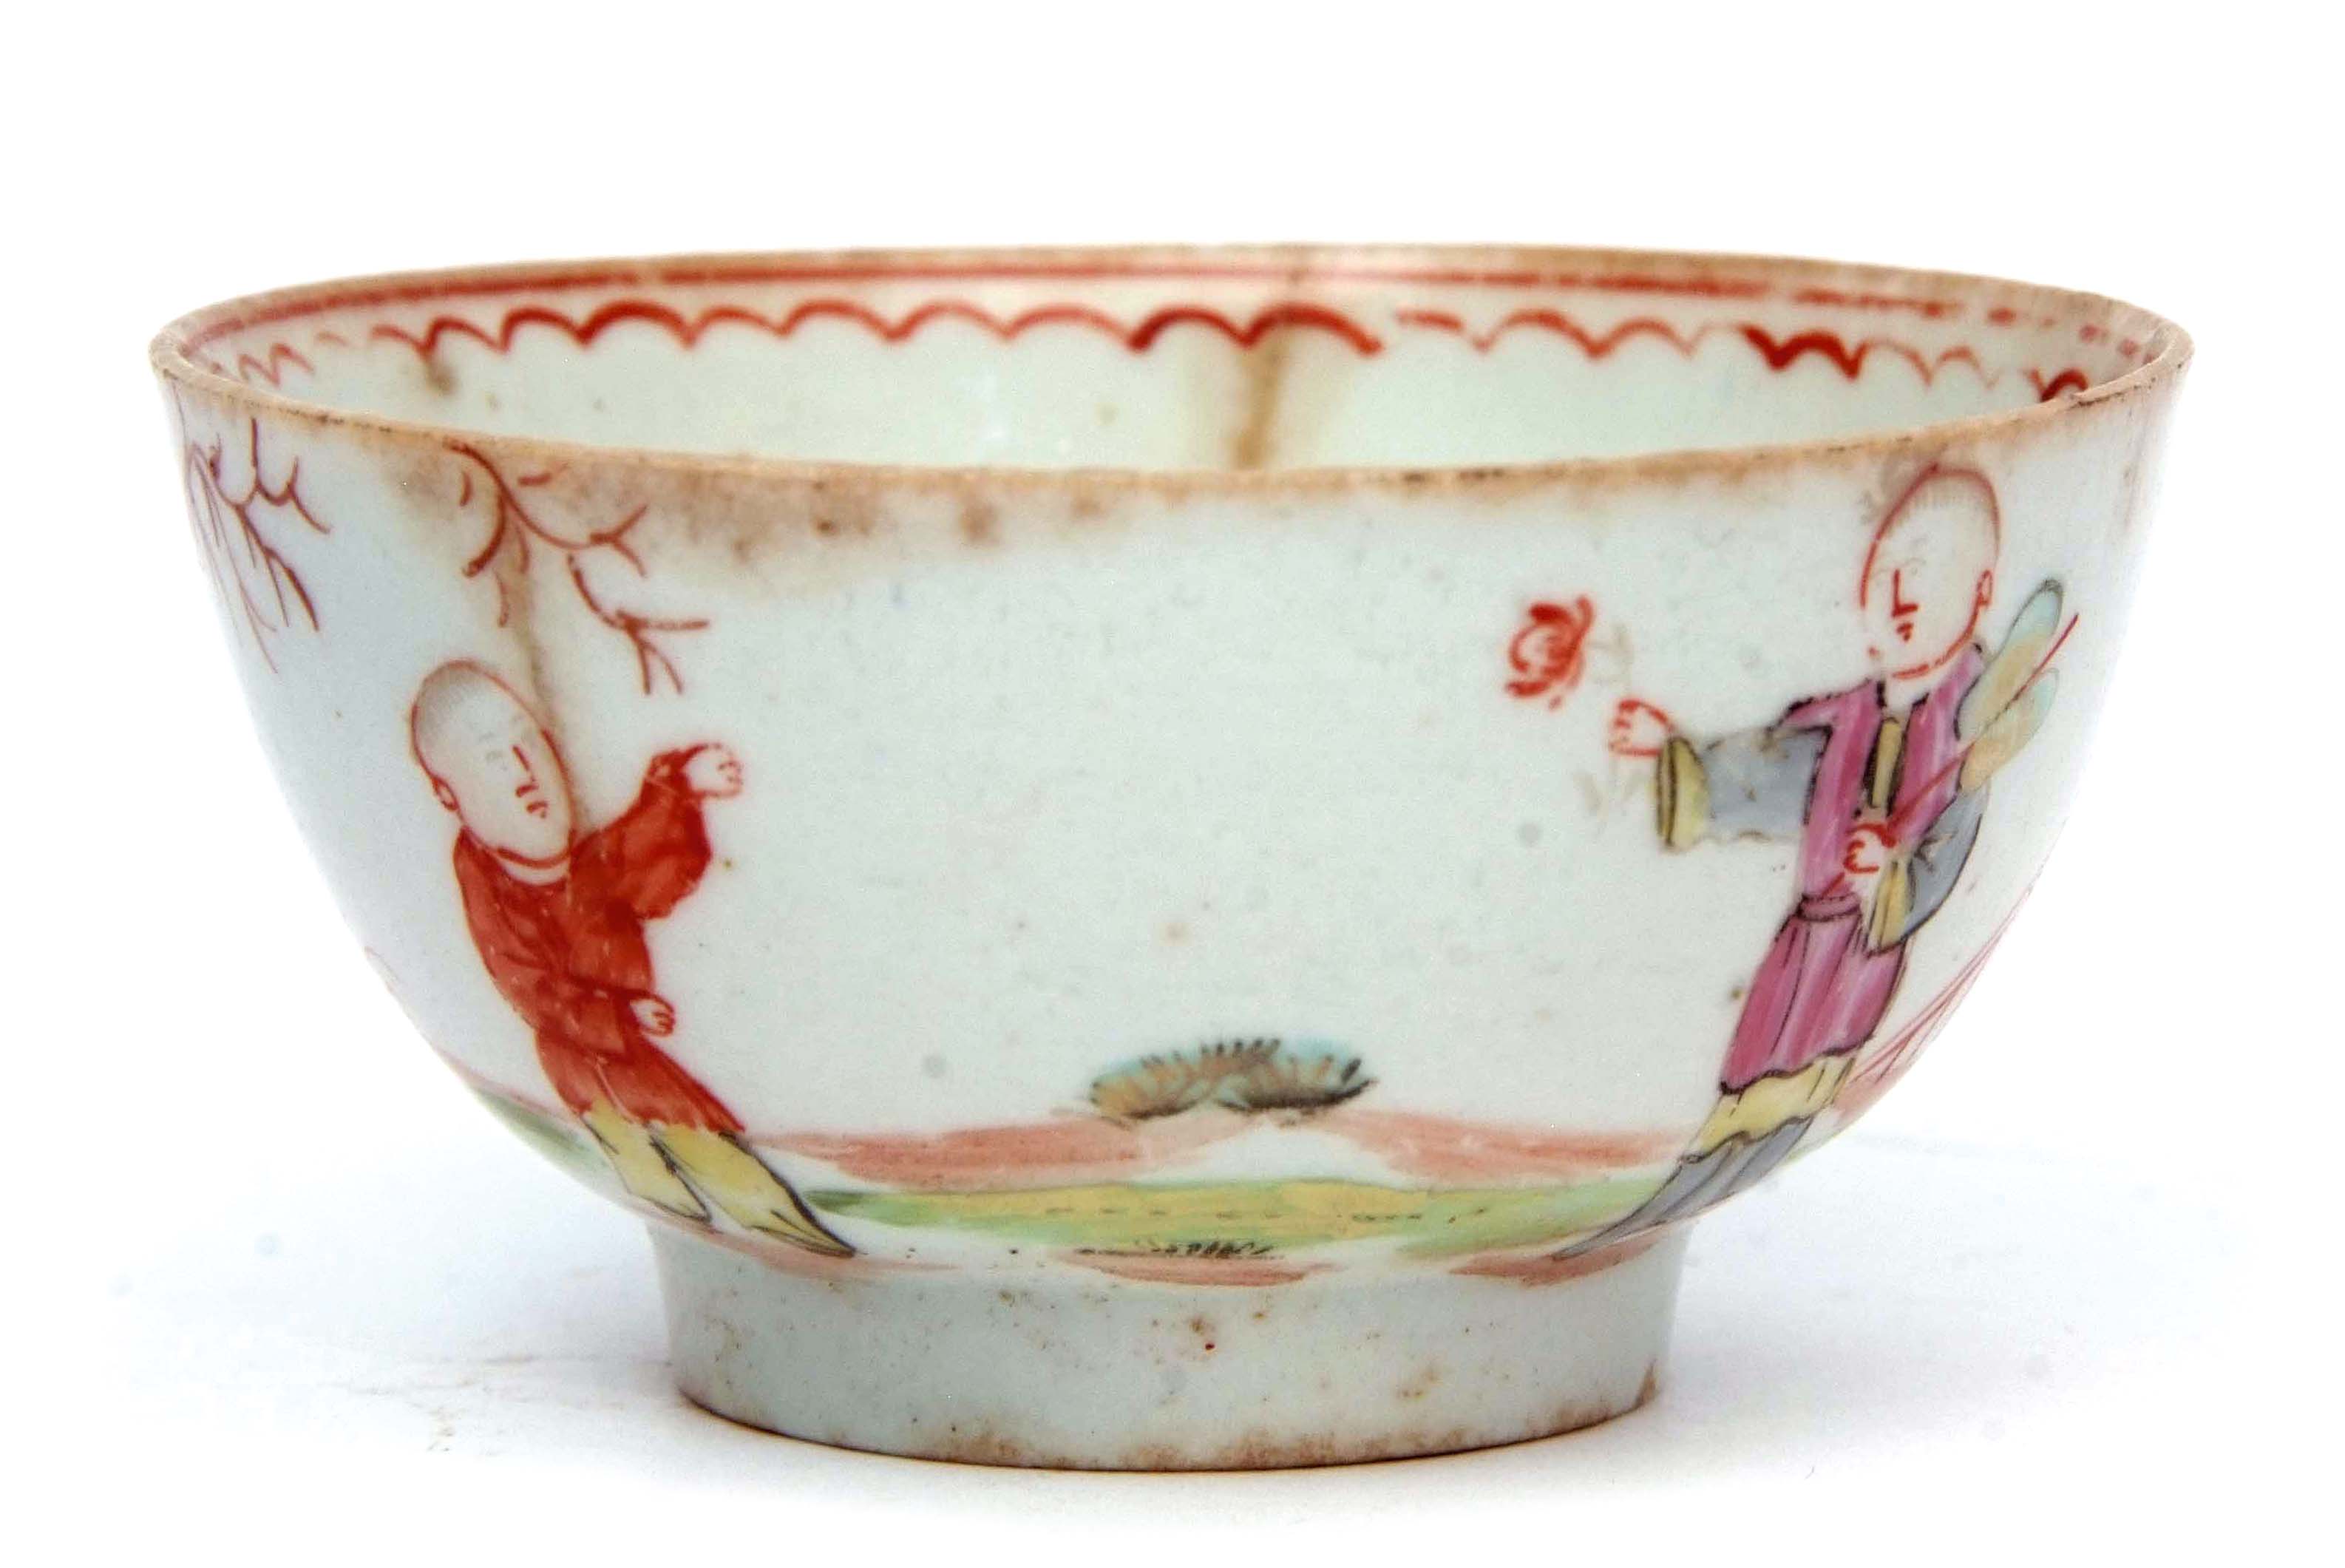 Early Lowestoft polychrome tea bowl with Chinese figures by a fence, the interior with line and loop